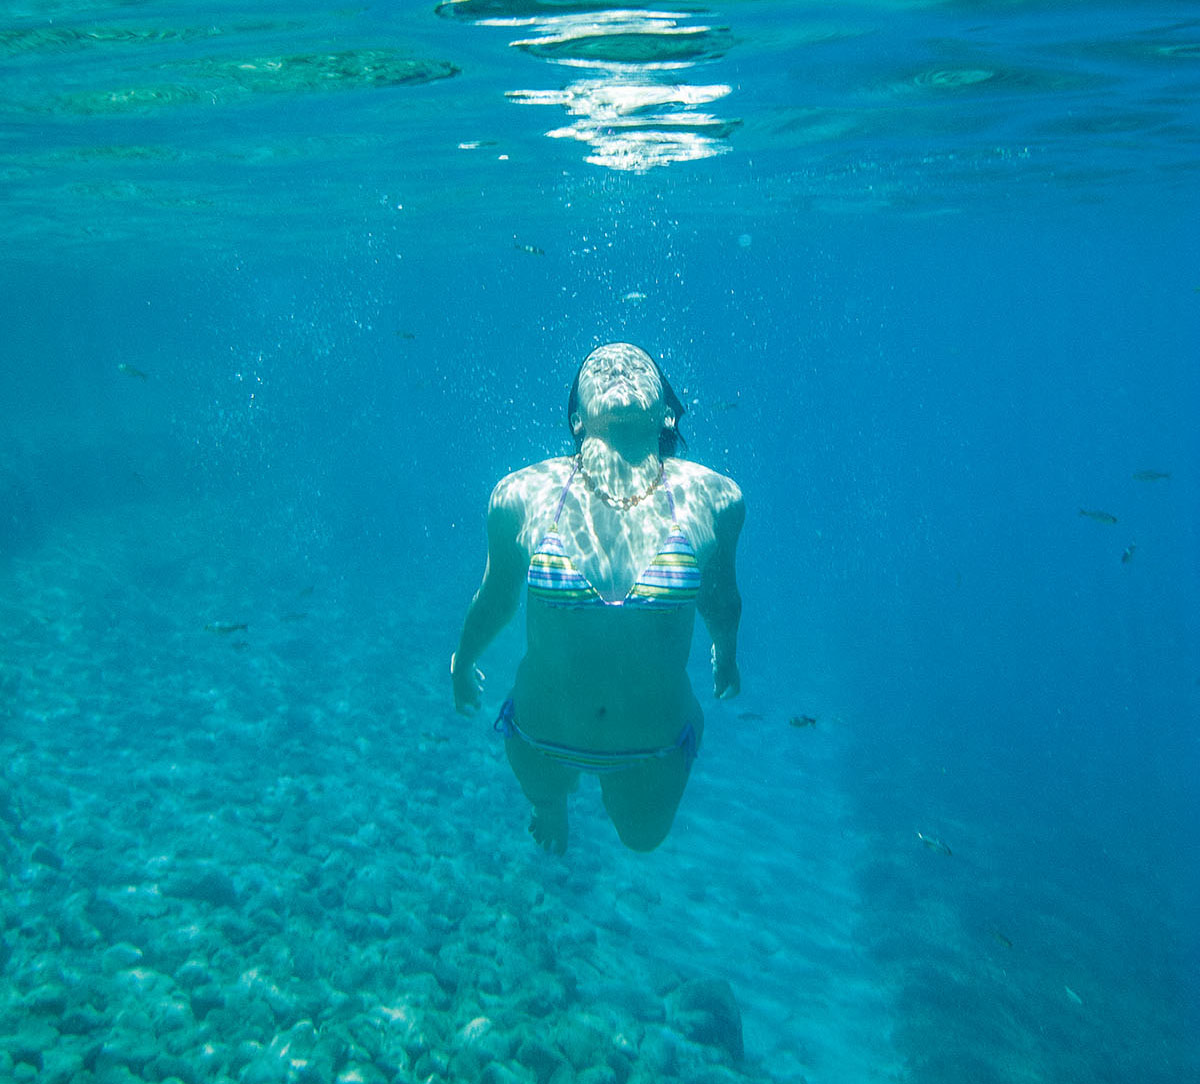 A person swims toward the surface in crystal-clear blue water